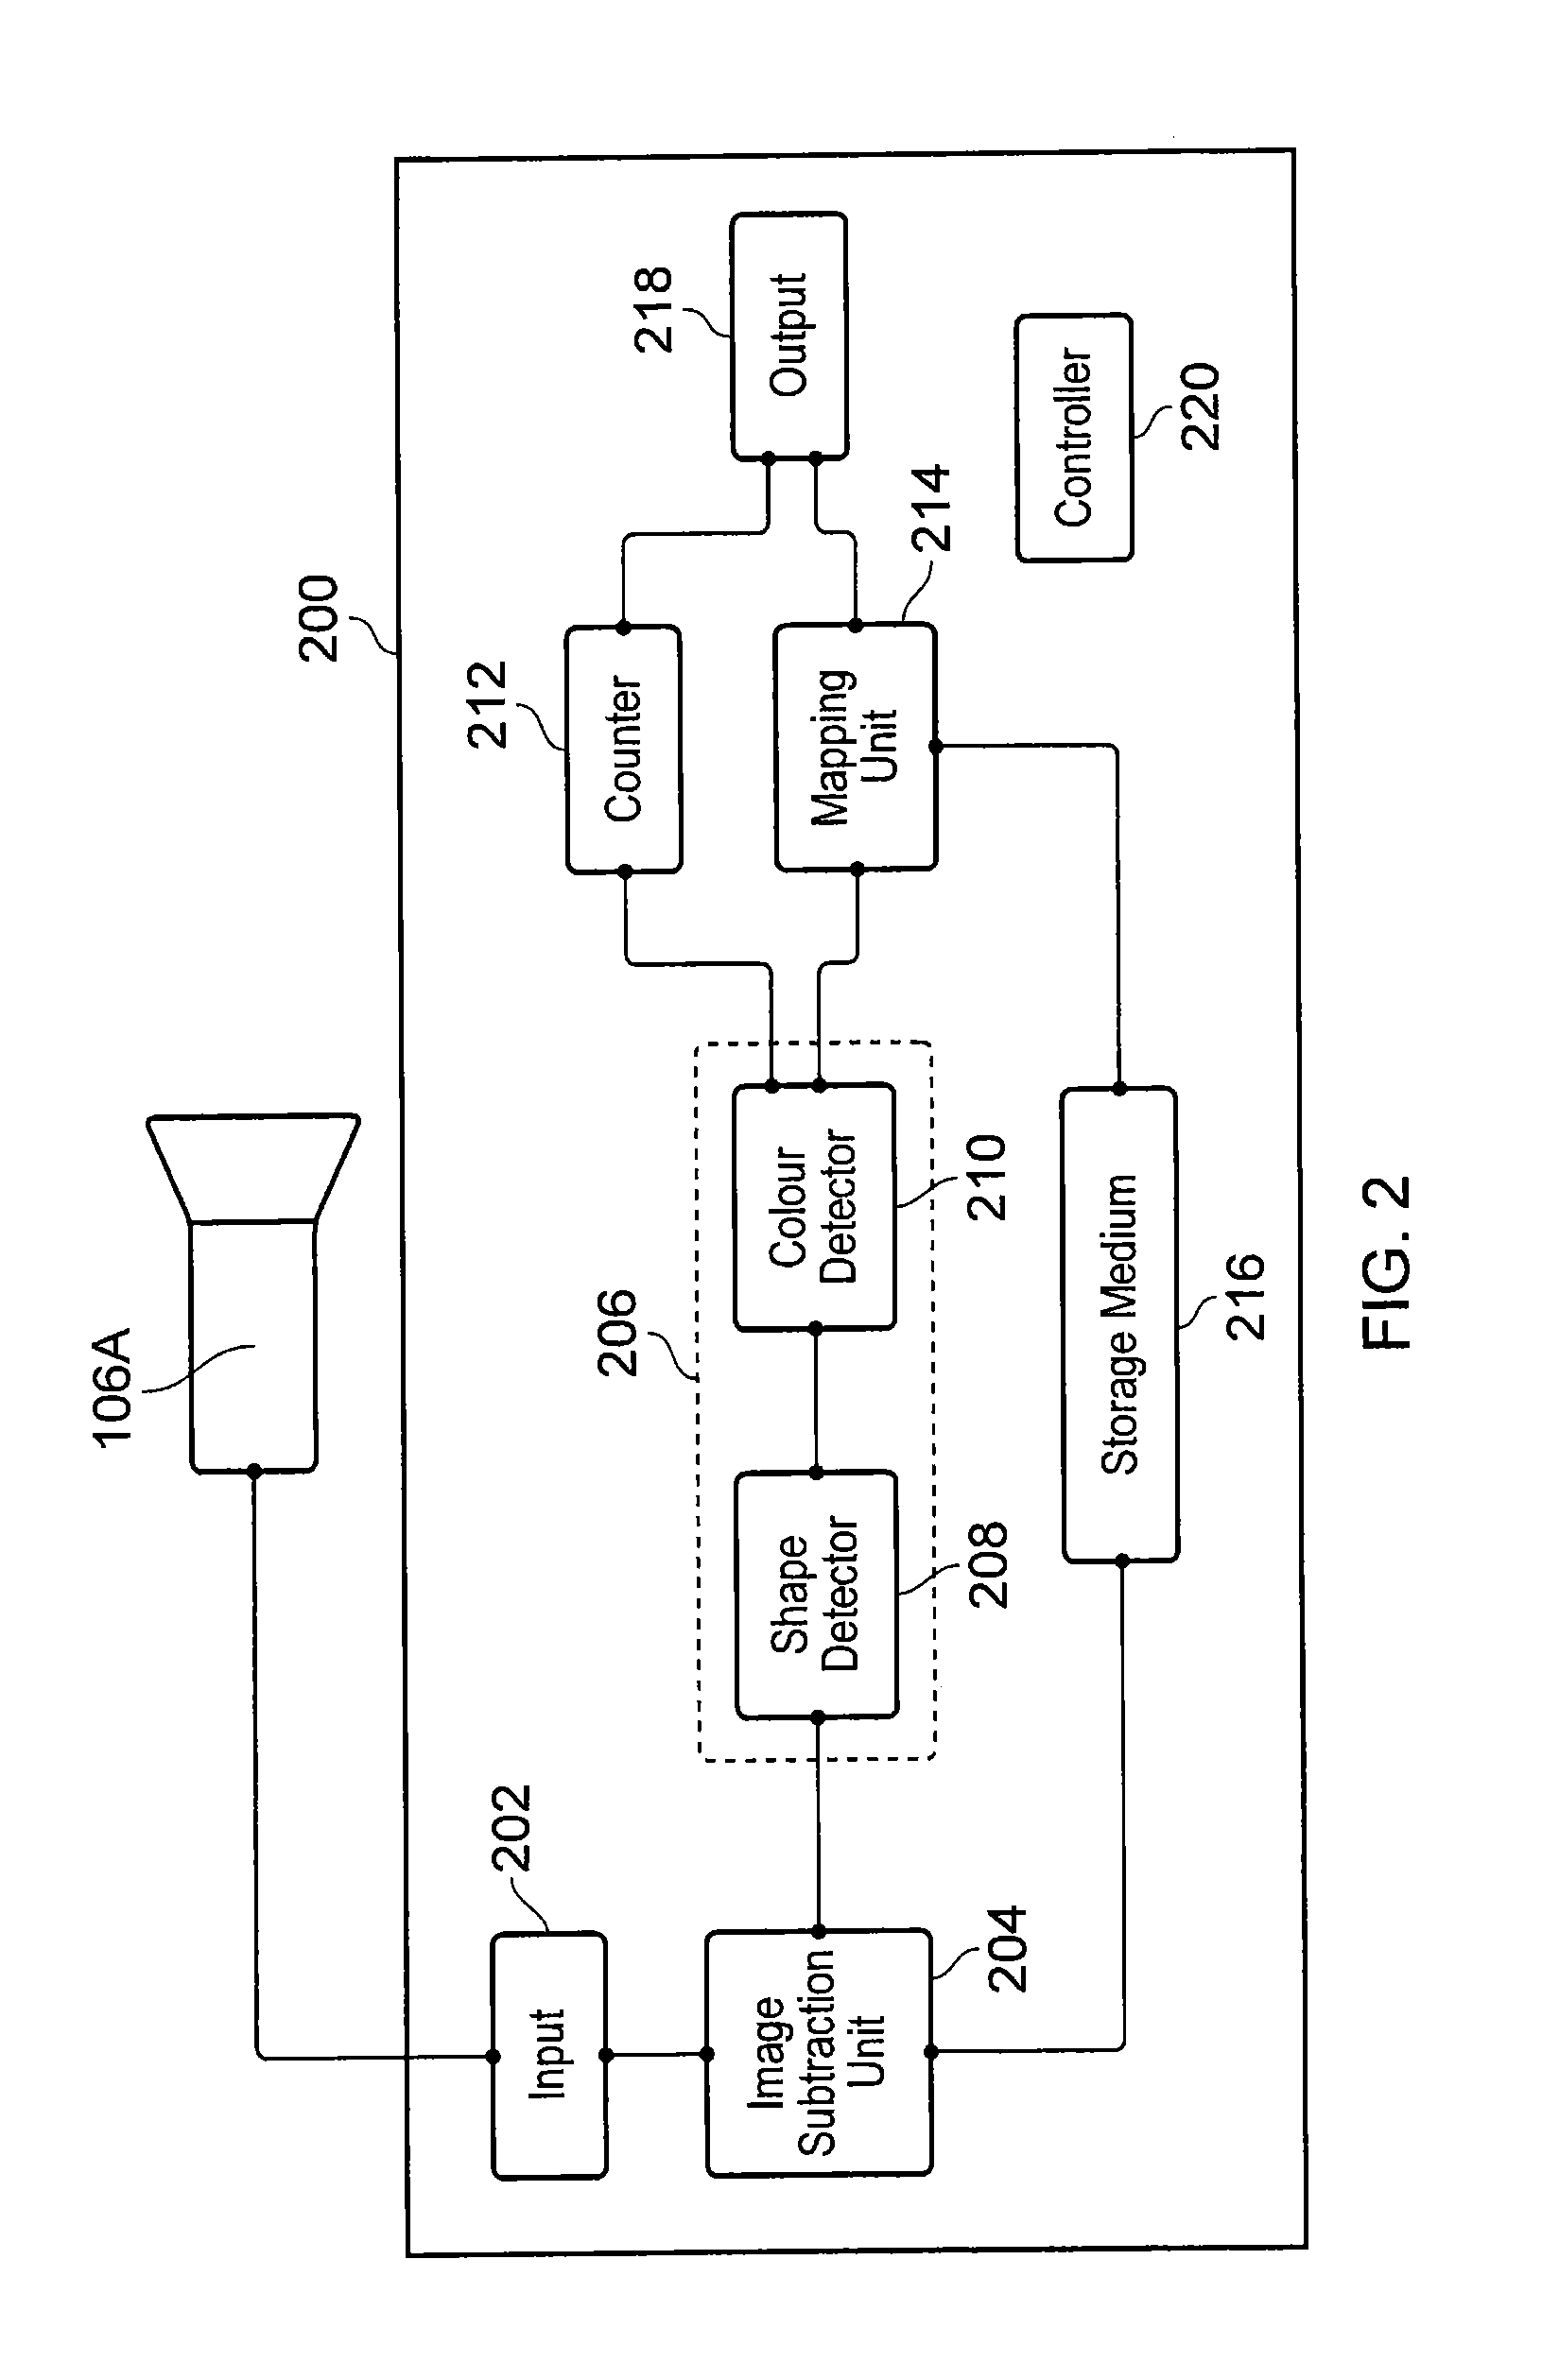 Method, system and apparatus for providing improved audience participation